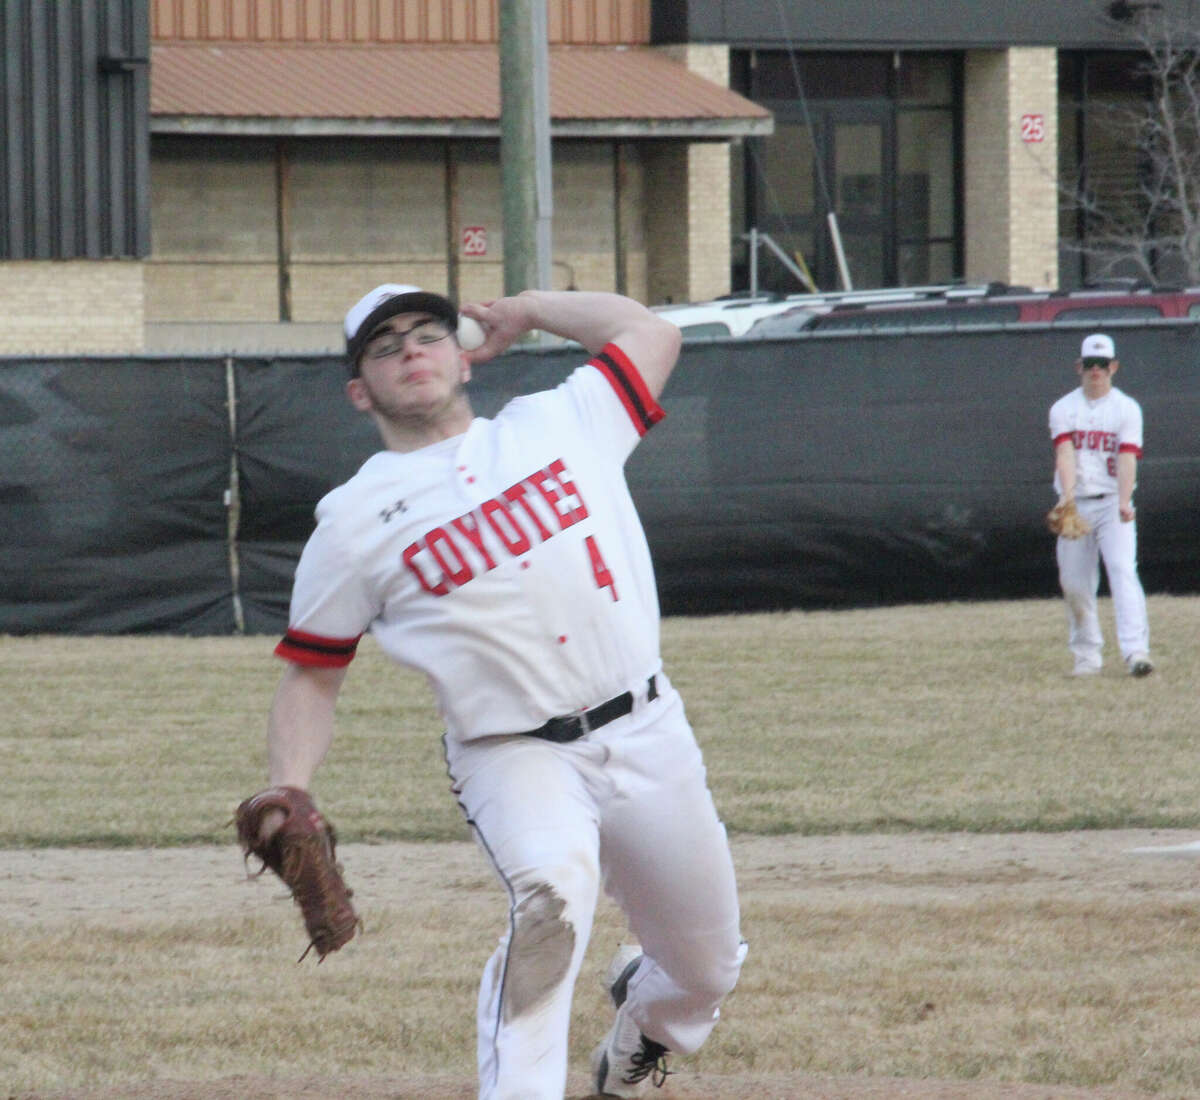 Reed City's Noah Morgan tossed a no-hitter against Central Montcalm on Friday.